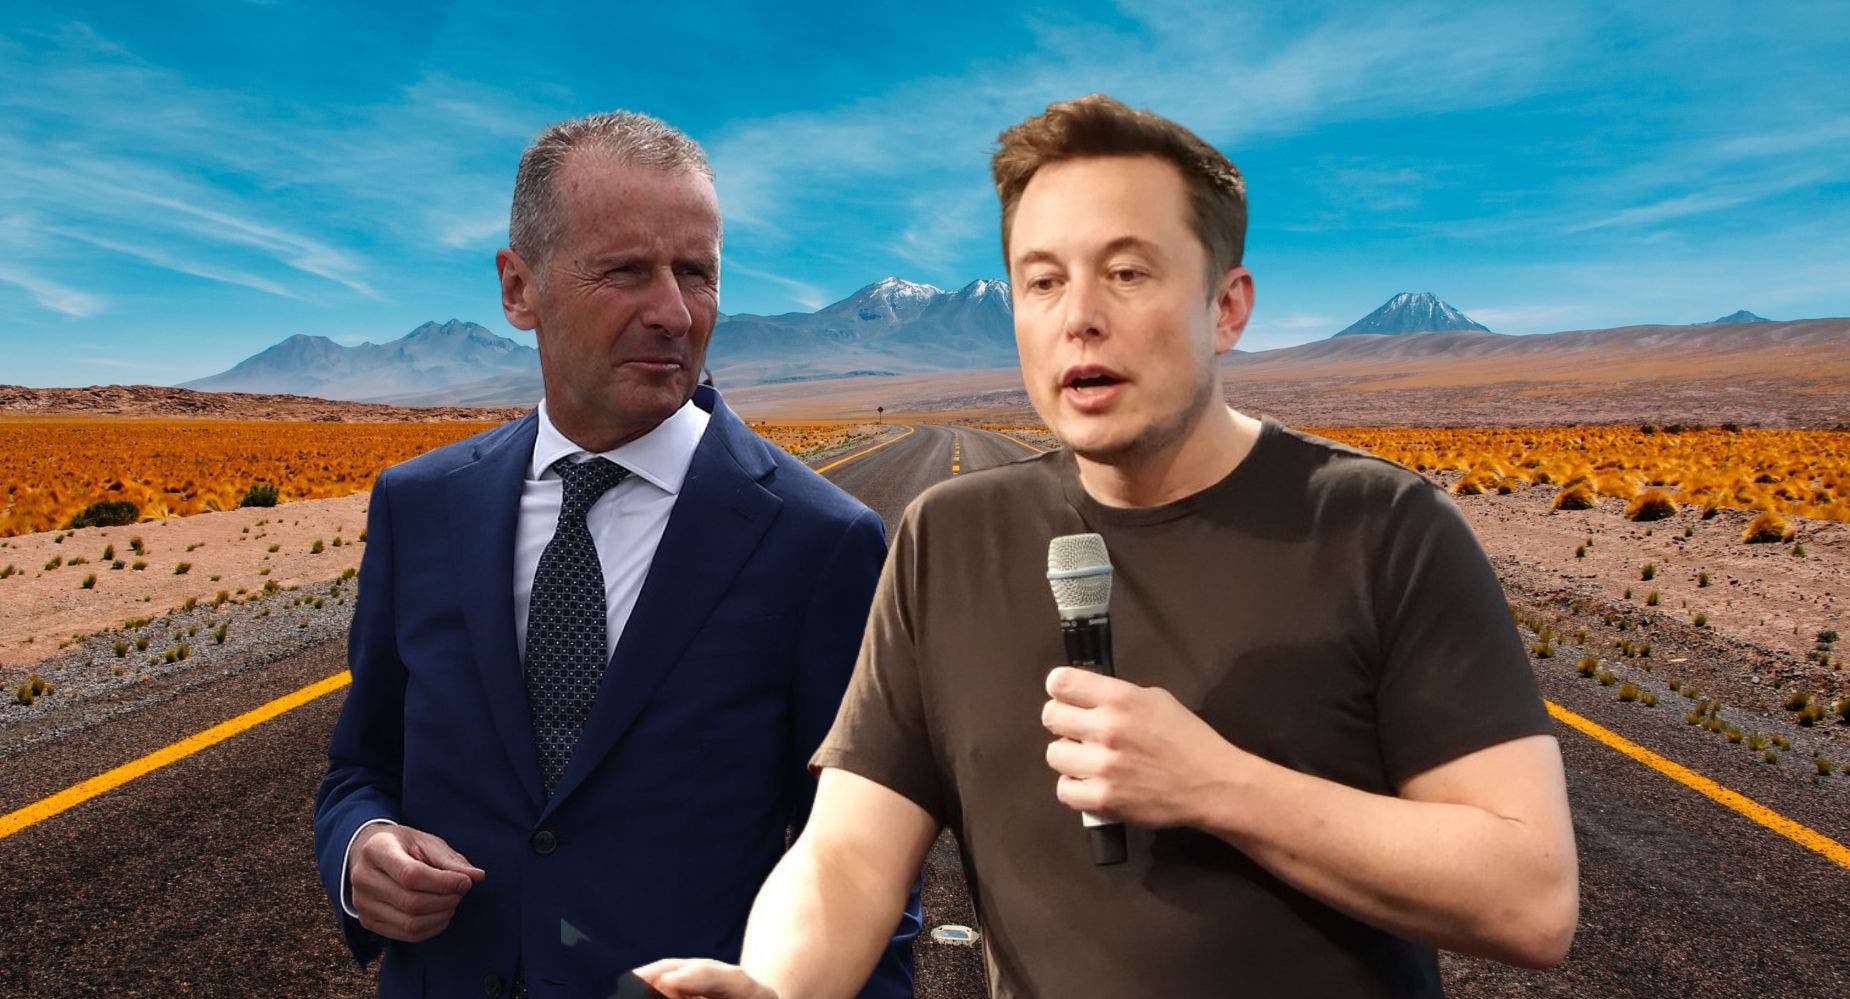 Elon Musk Responds To Reports That Software Issues Led To Volkswagen CEO Herbert Diess' Departure